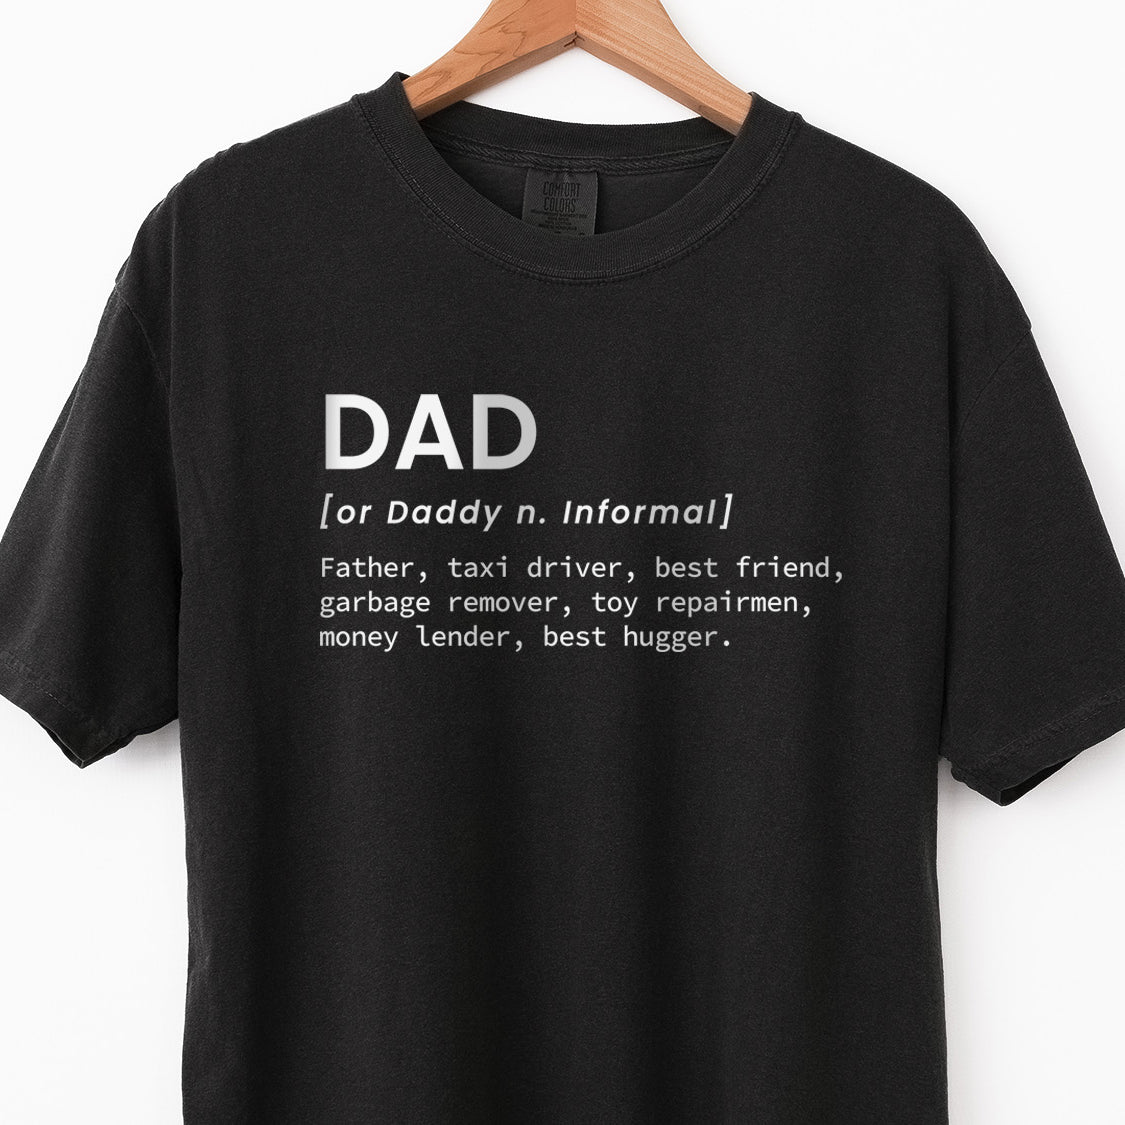 Funny Definition of Dad T-shirt - Funny Family Retro Vintage Design Printed T-Shirt